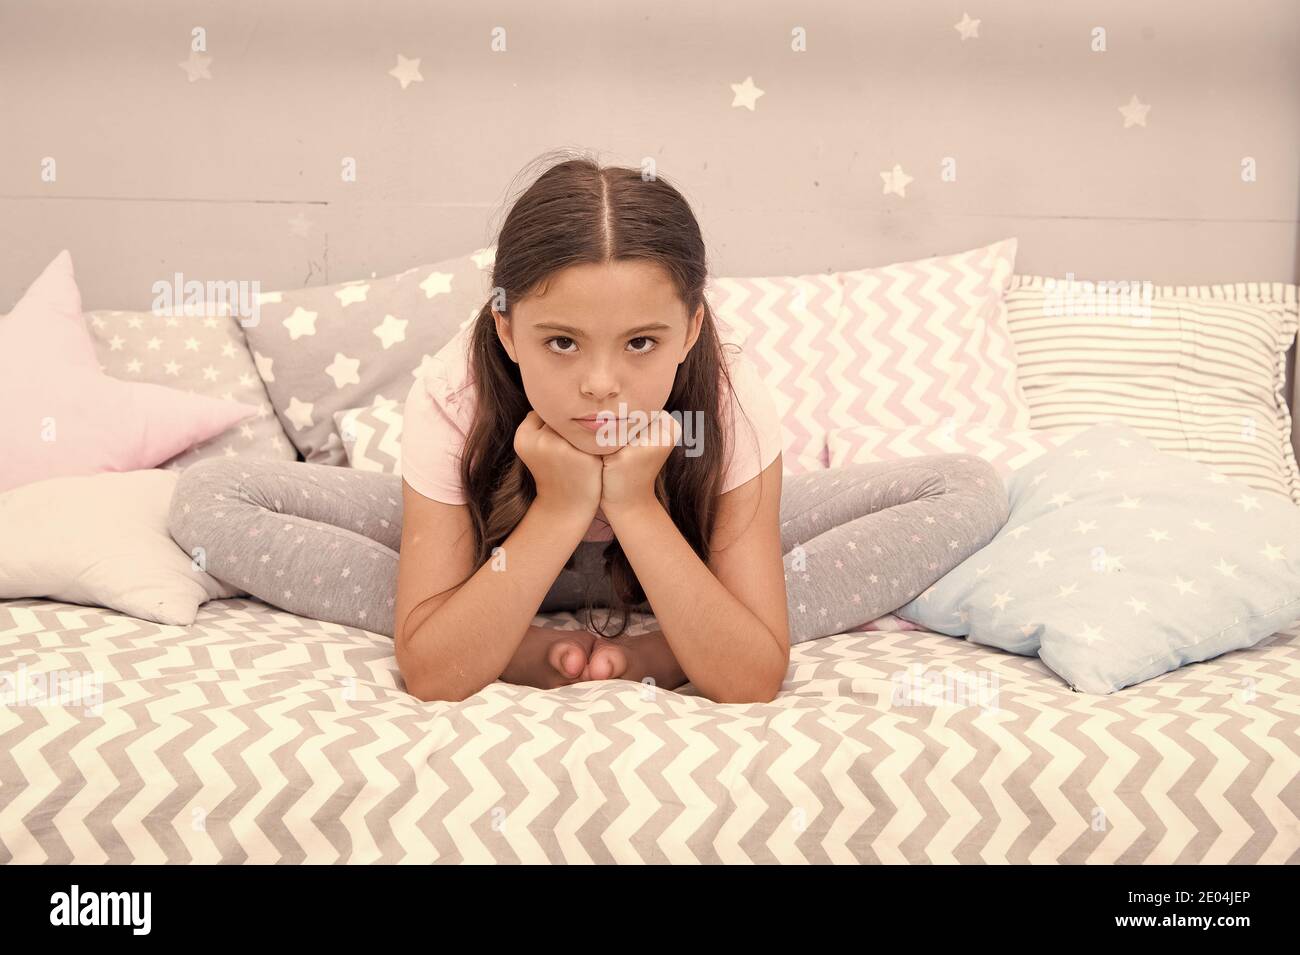 Why so sad. Sad girl sit in bed. Little child with sad look. Bedtime routine. Daytime nap. Kids health. Childcare. Early morning hour. Good night. Unhappy and sad. Stock Photo